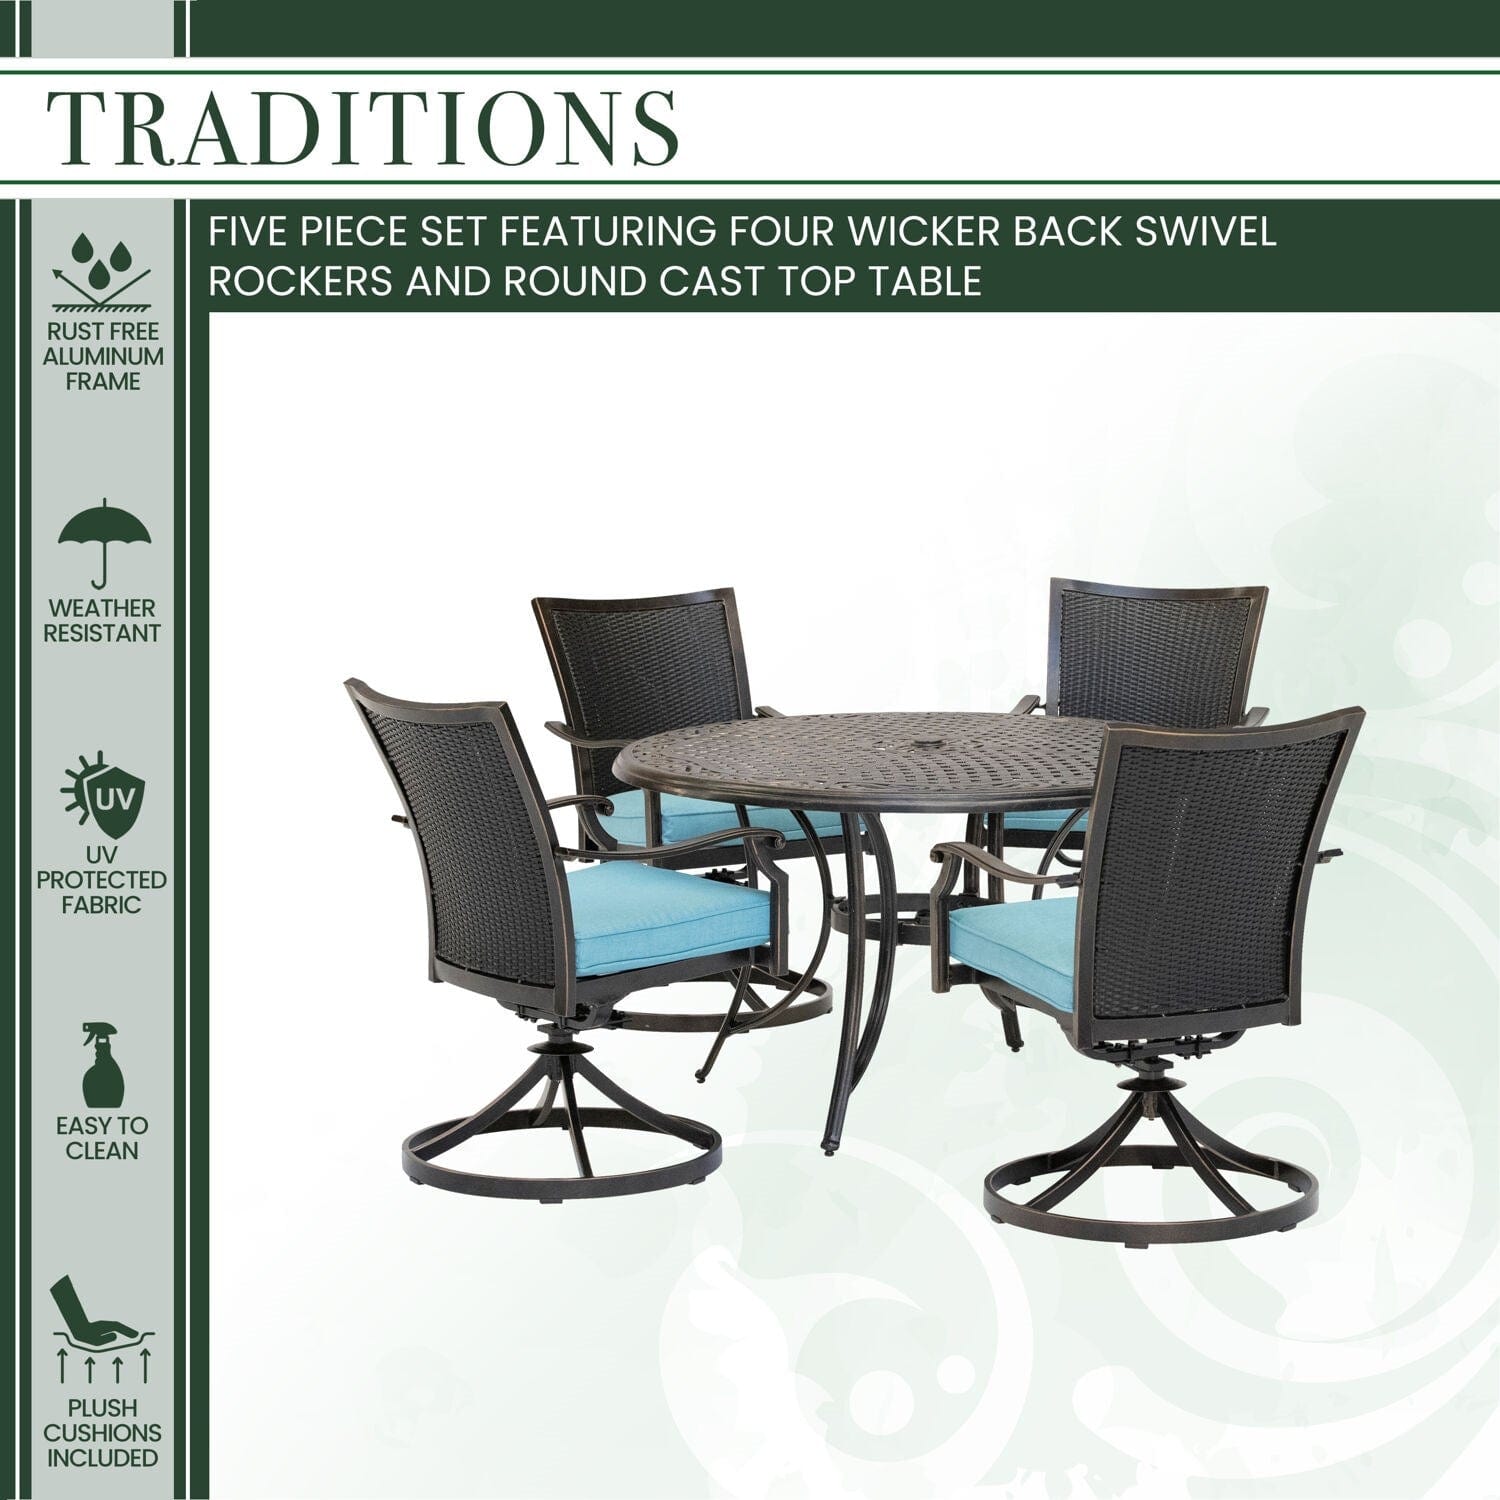 Hanover Outdoor Dining Set Hanover Traditions 5-Piece Dining Set in Blue with 4 Wicker Back Swivel Rockers and 48 in. Cast-Top Table